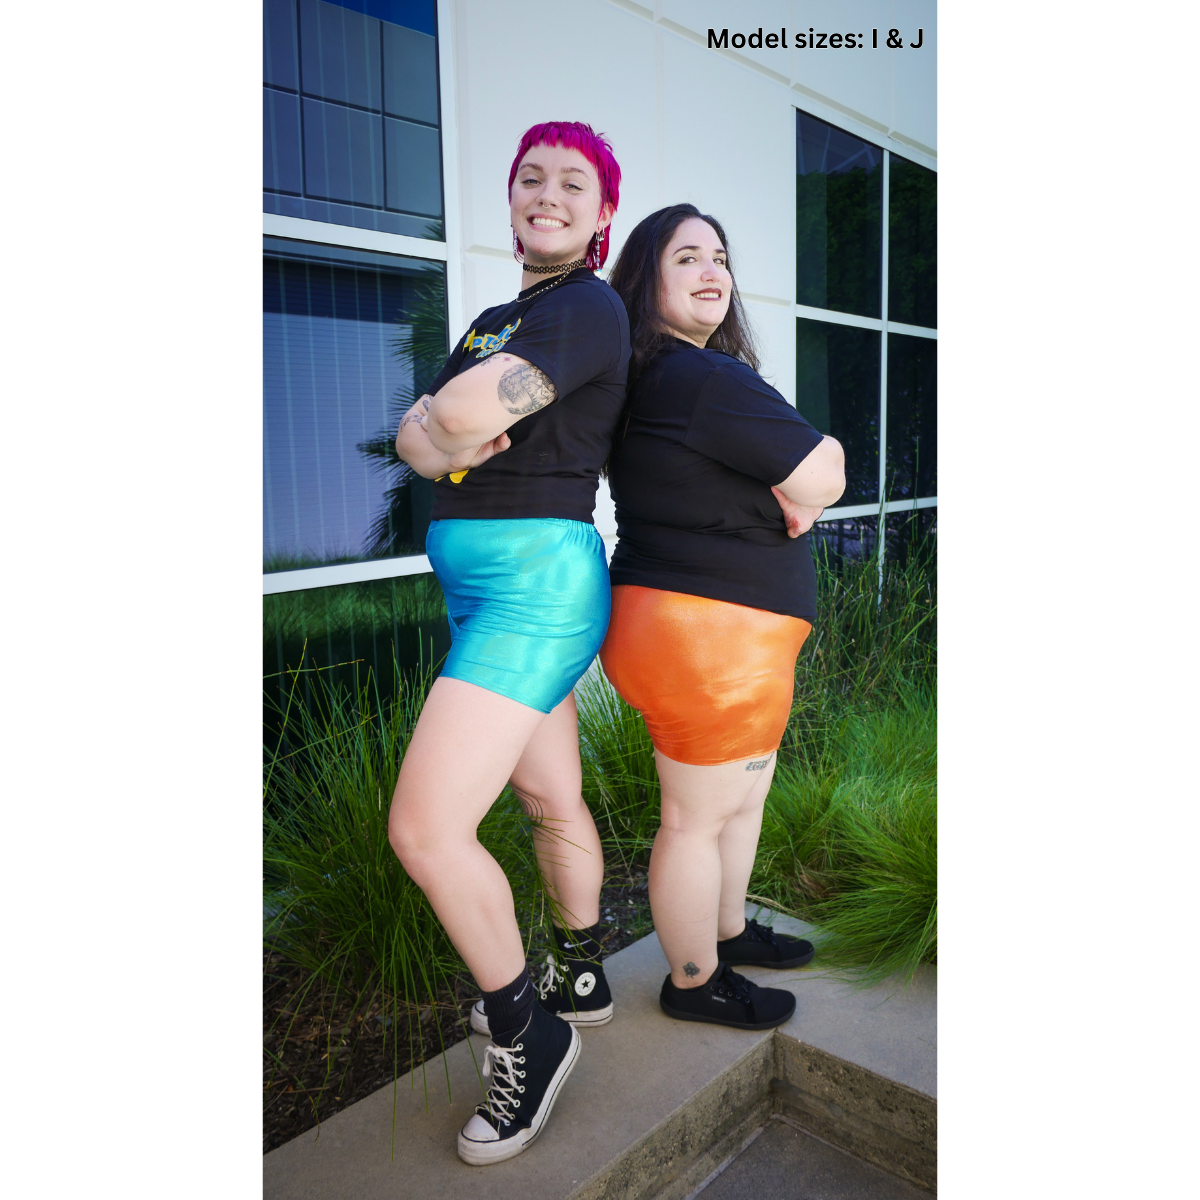 A photo of 2 people. One wearing blue Safety Shorts (size I), and the other wearing orange Safety Shorts (size J).